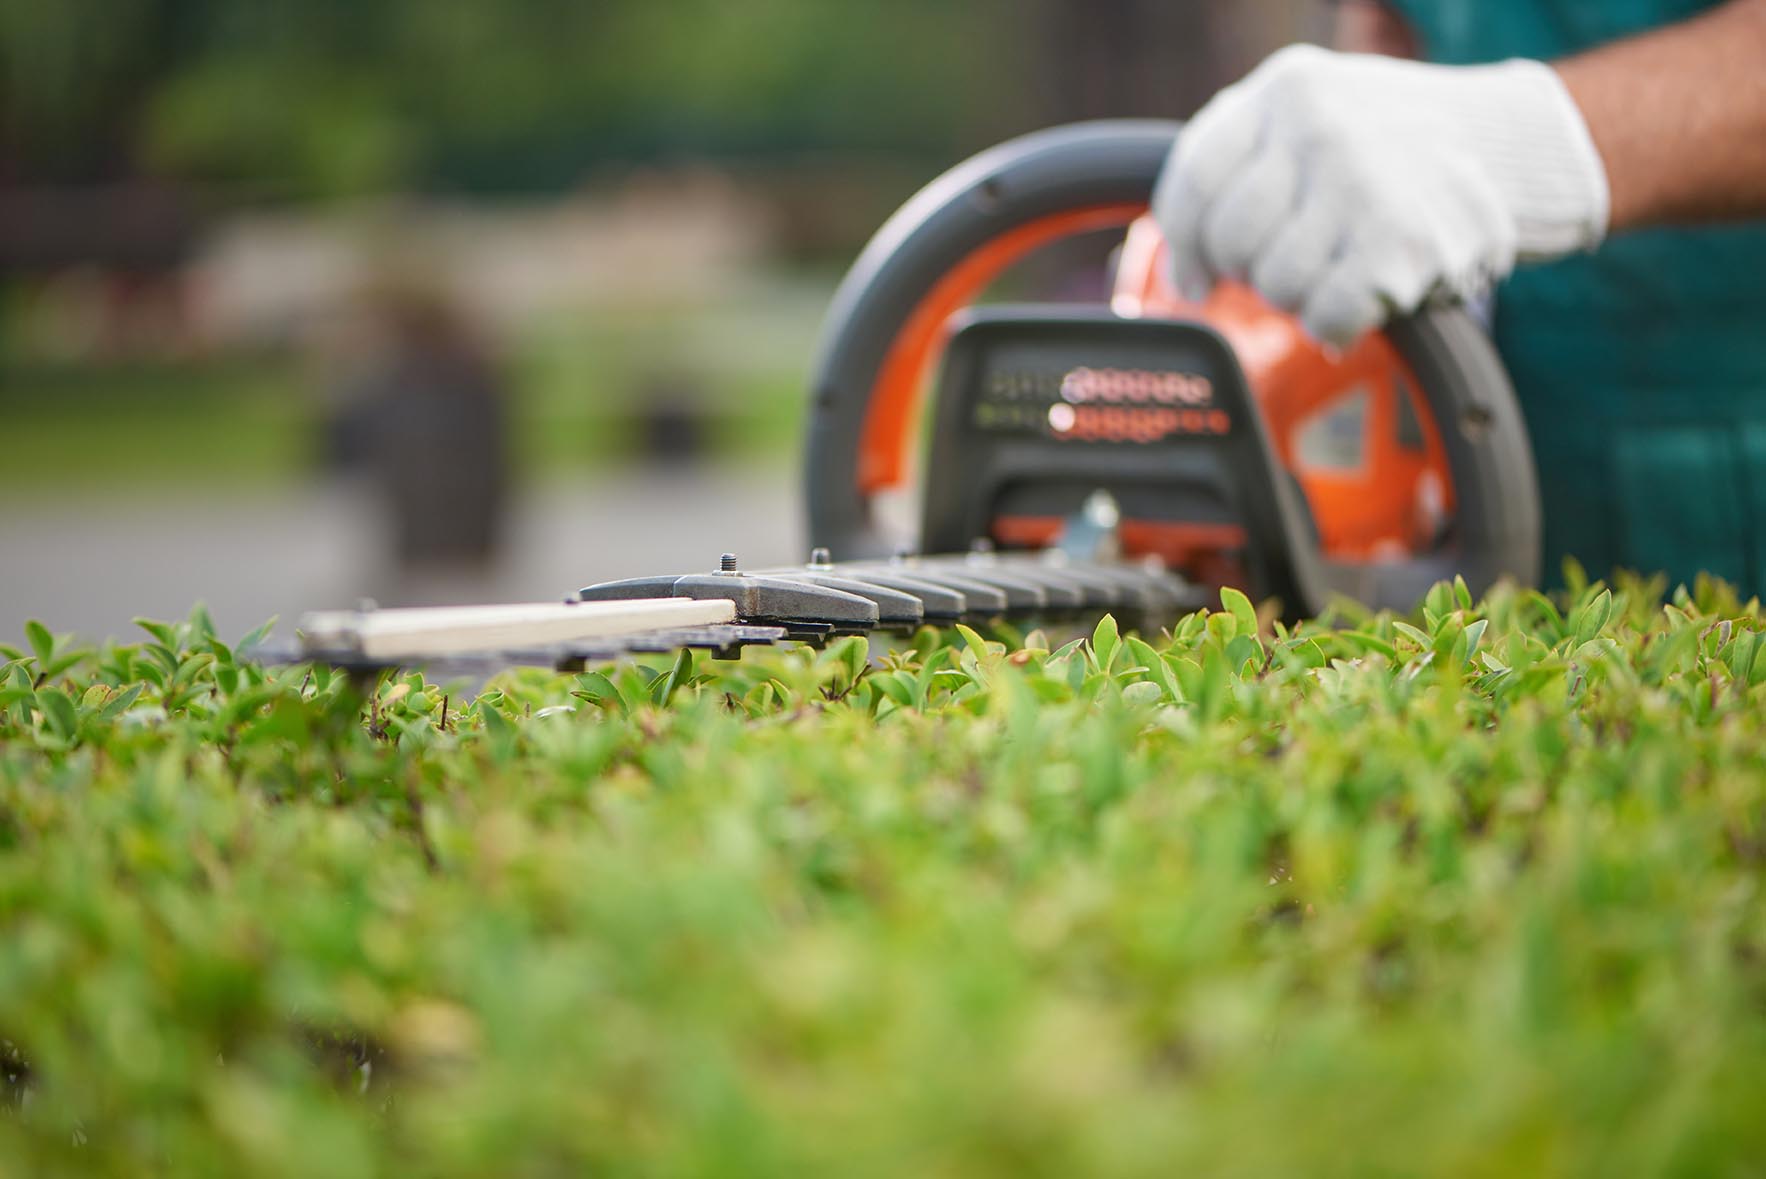 Lawn Care and Gardening Advice from Experts in Geelong, VIC